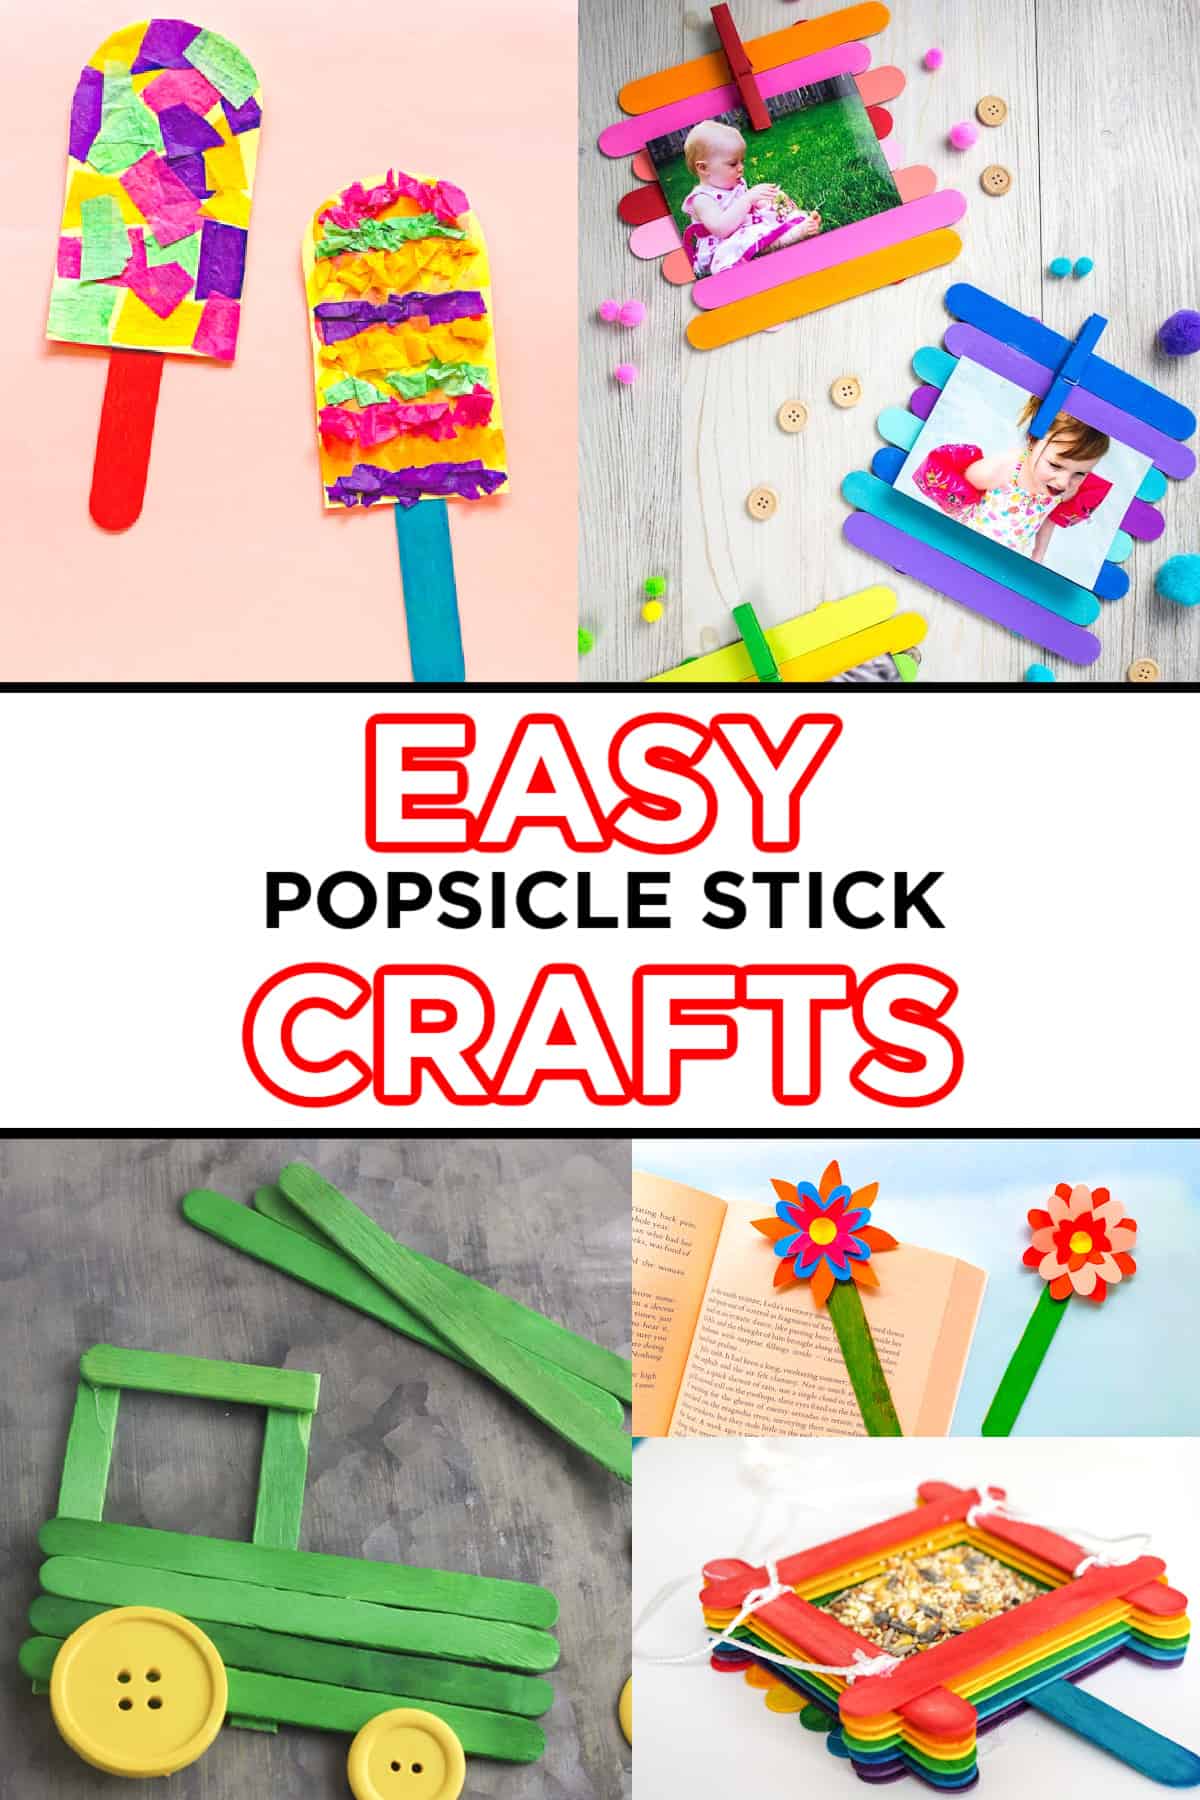 45 Outstanding Popsicle Craft Stick DIY Ideas  Ice cream stick craft, Craft  stick crafts, Popsicle crafts